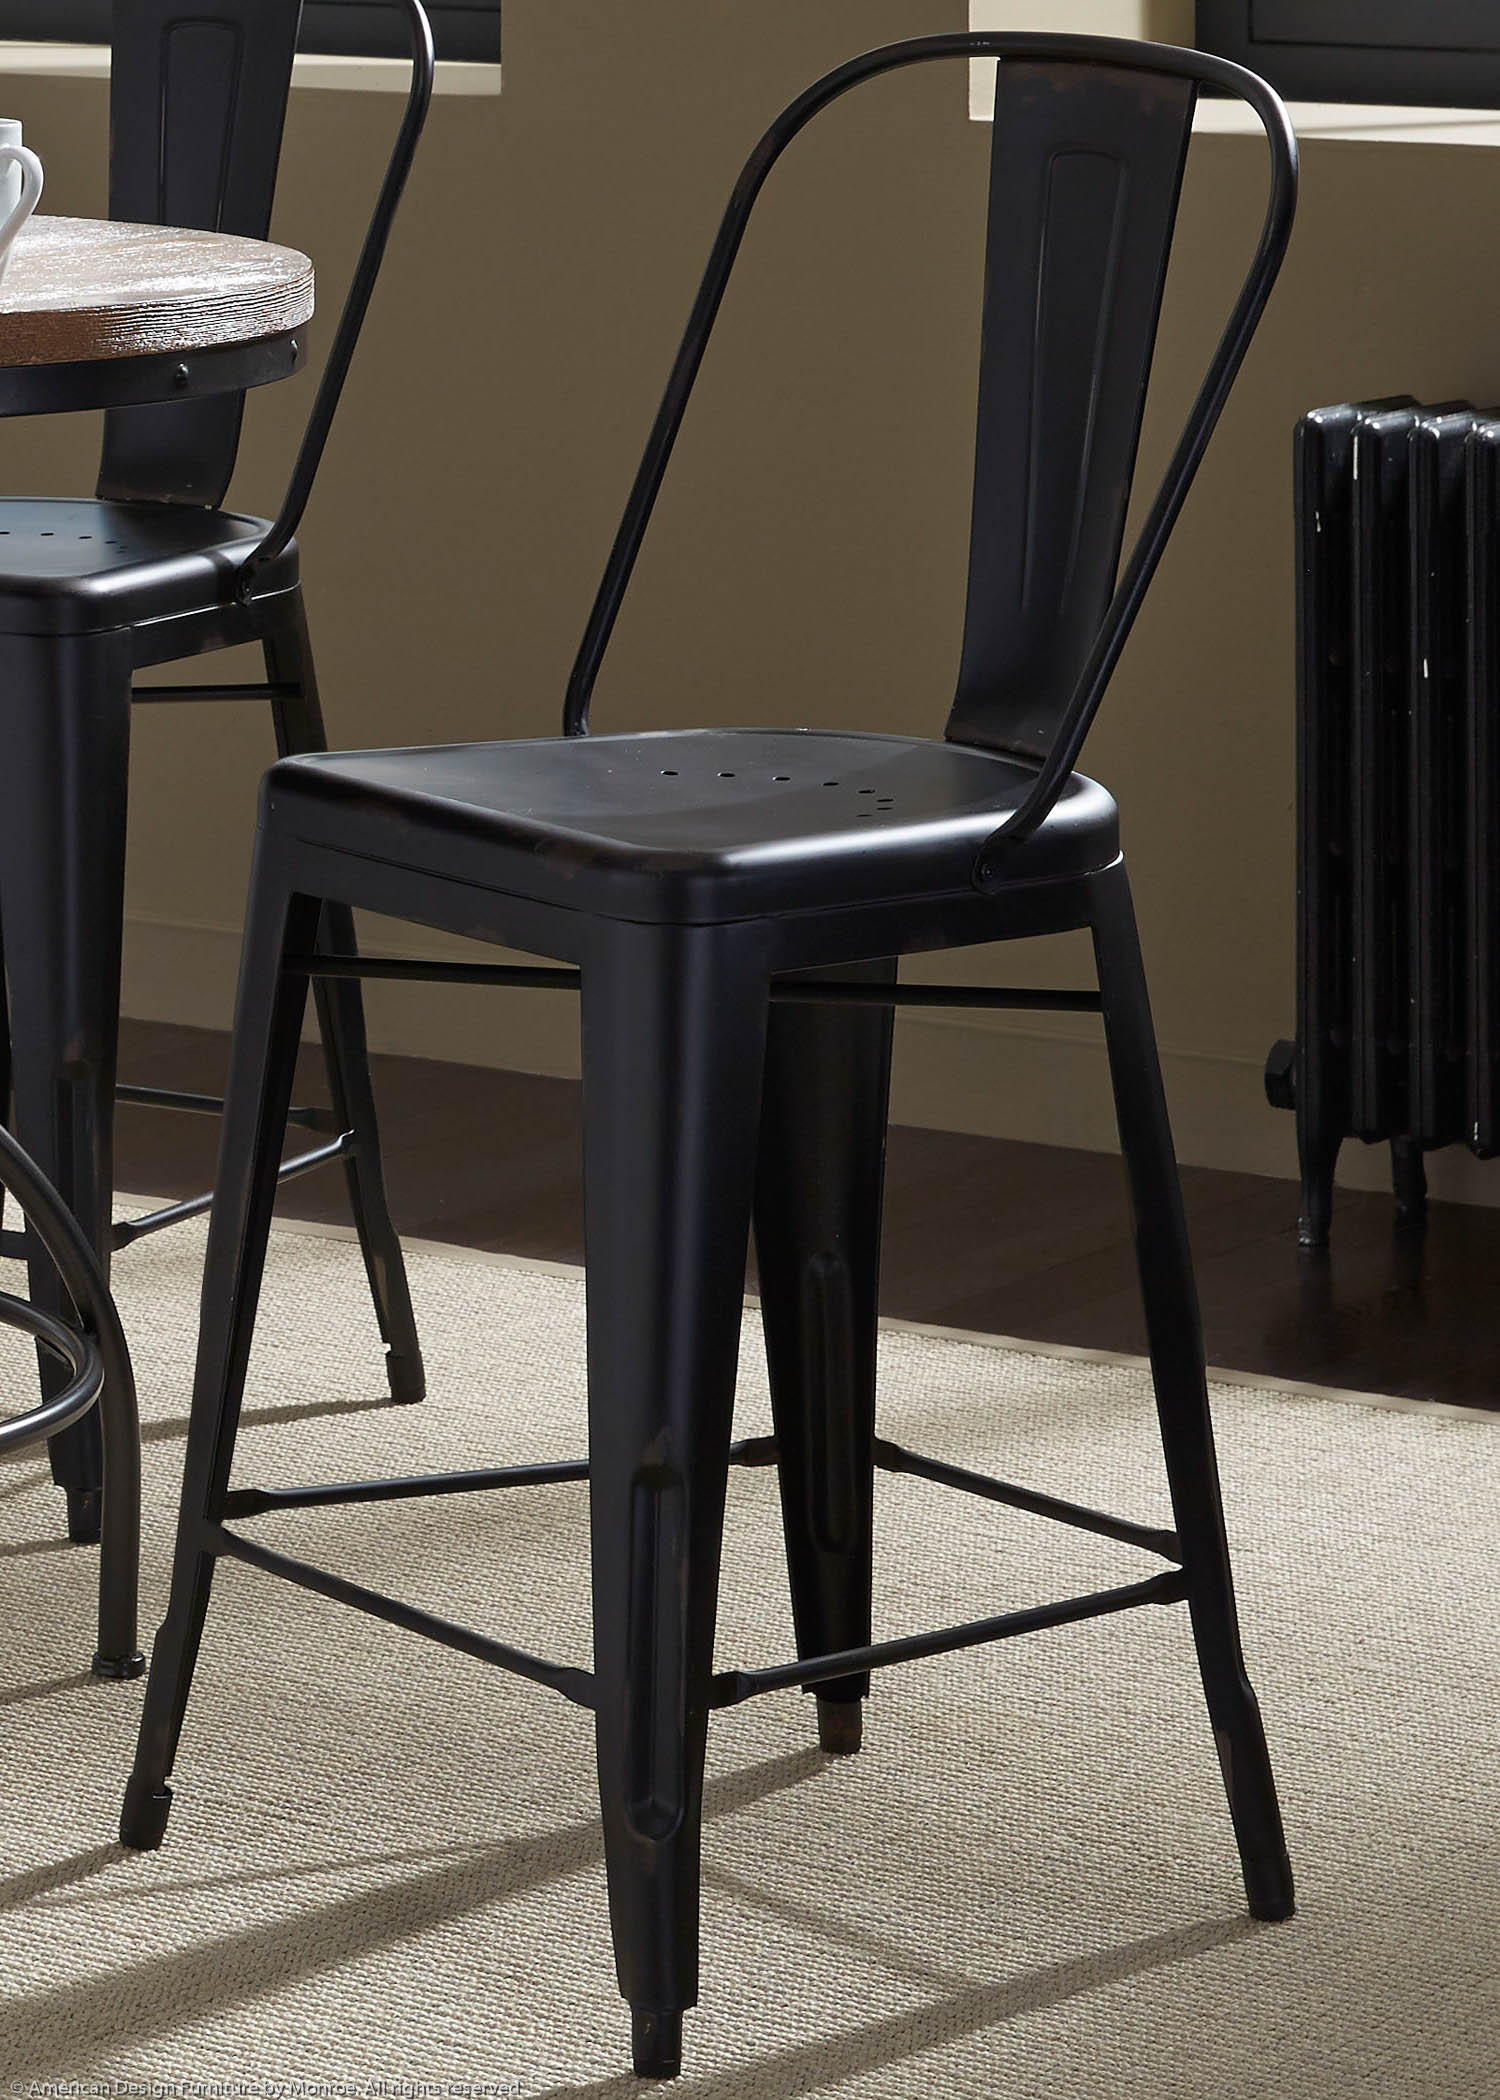 Reading Casual Bow Back Counter Chair Pic 06 (Heading Bow Back Counter Chair 2 (Black)